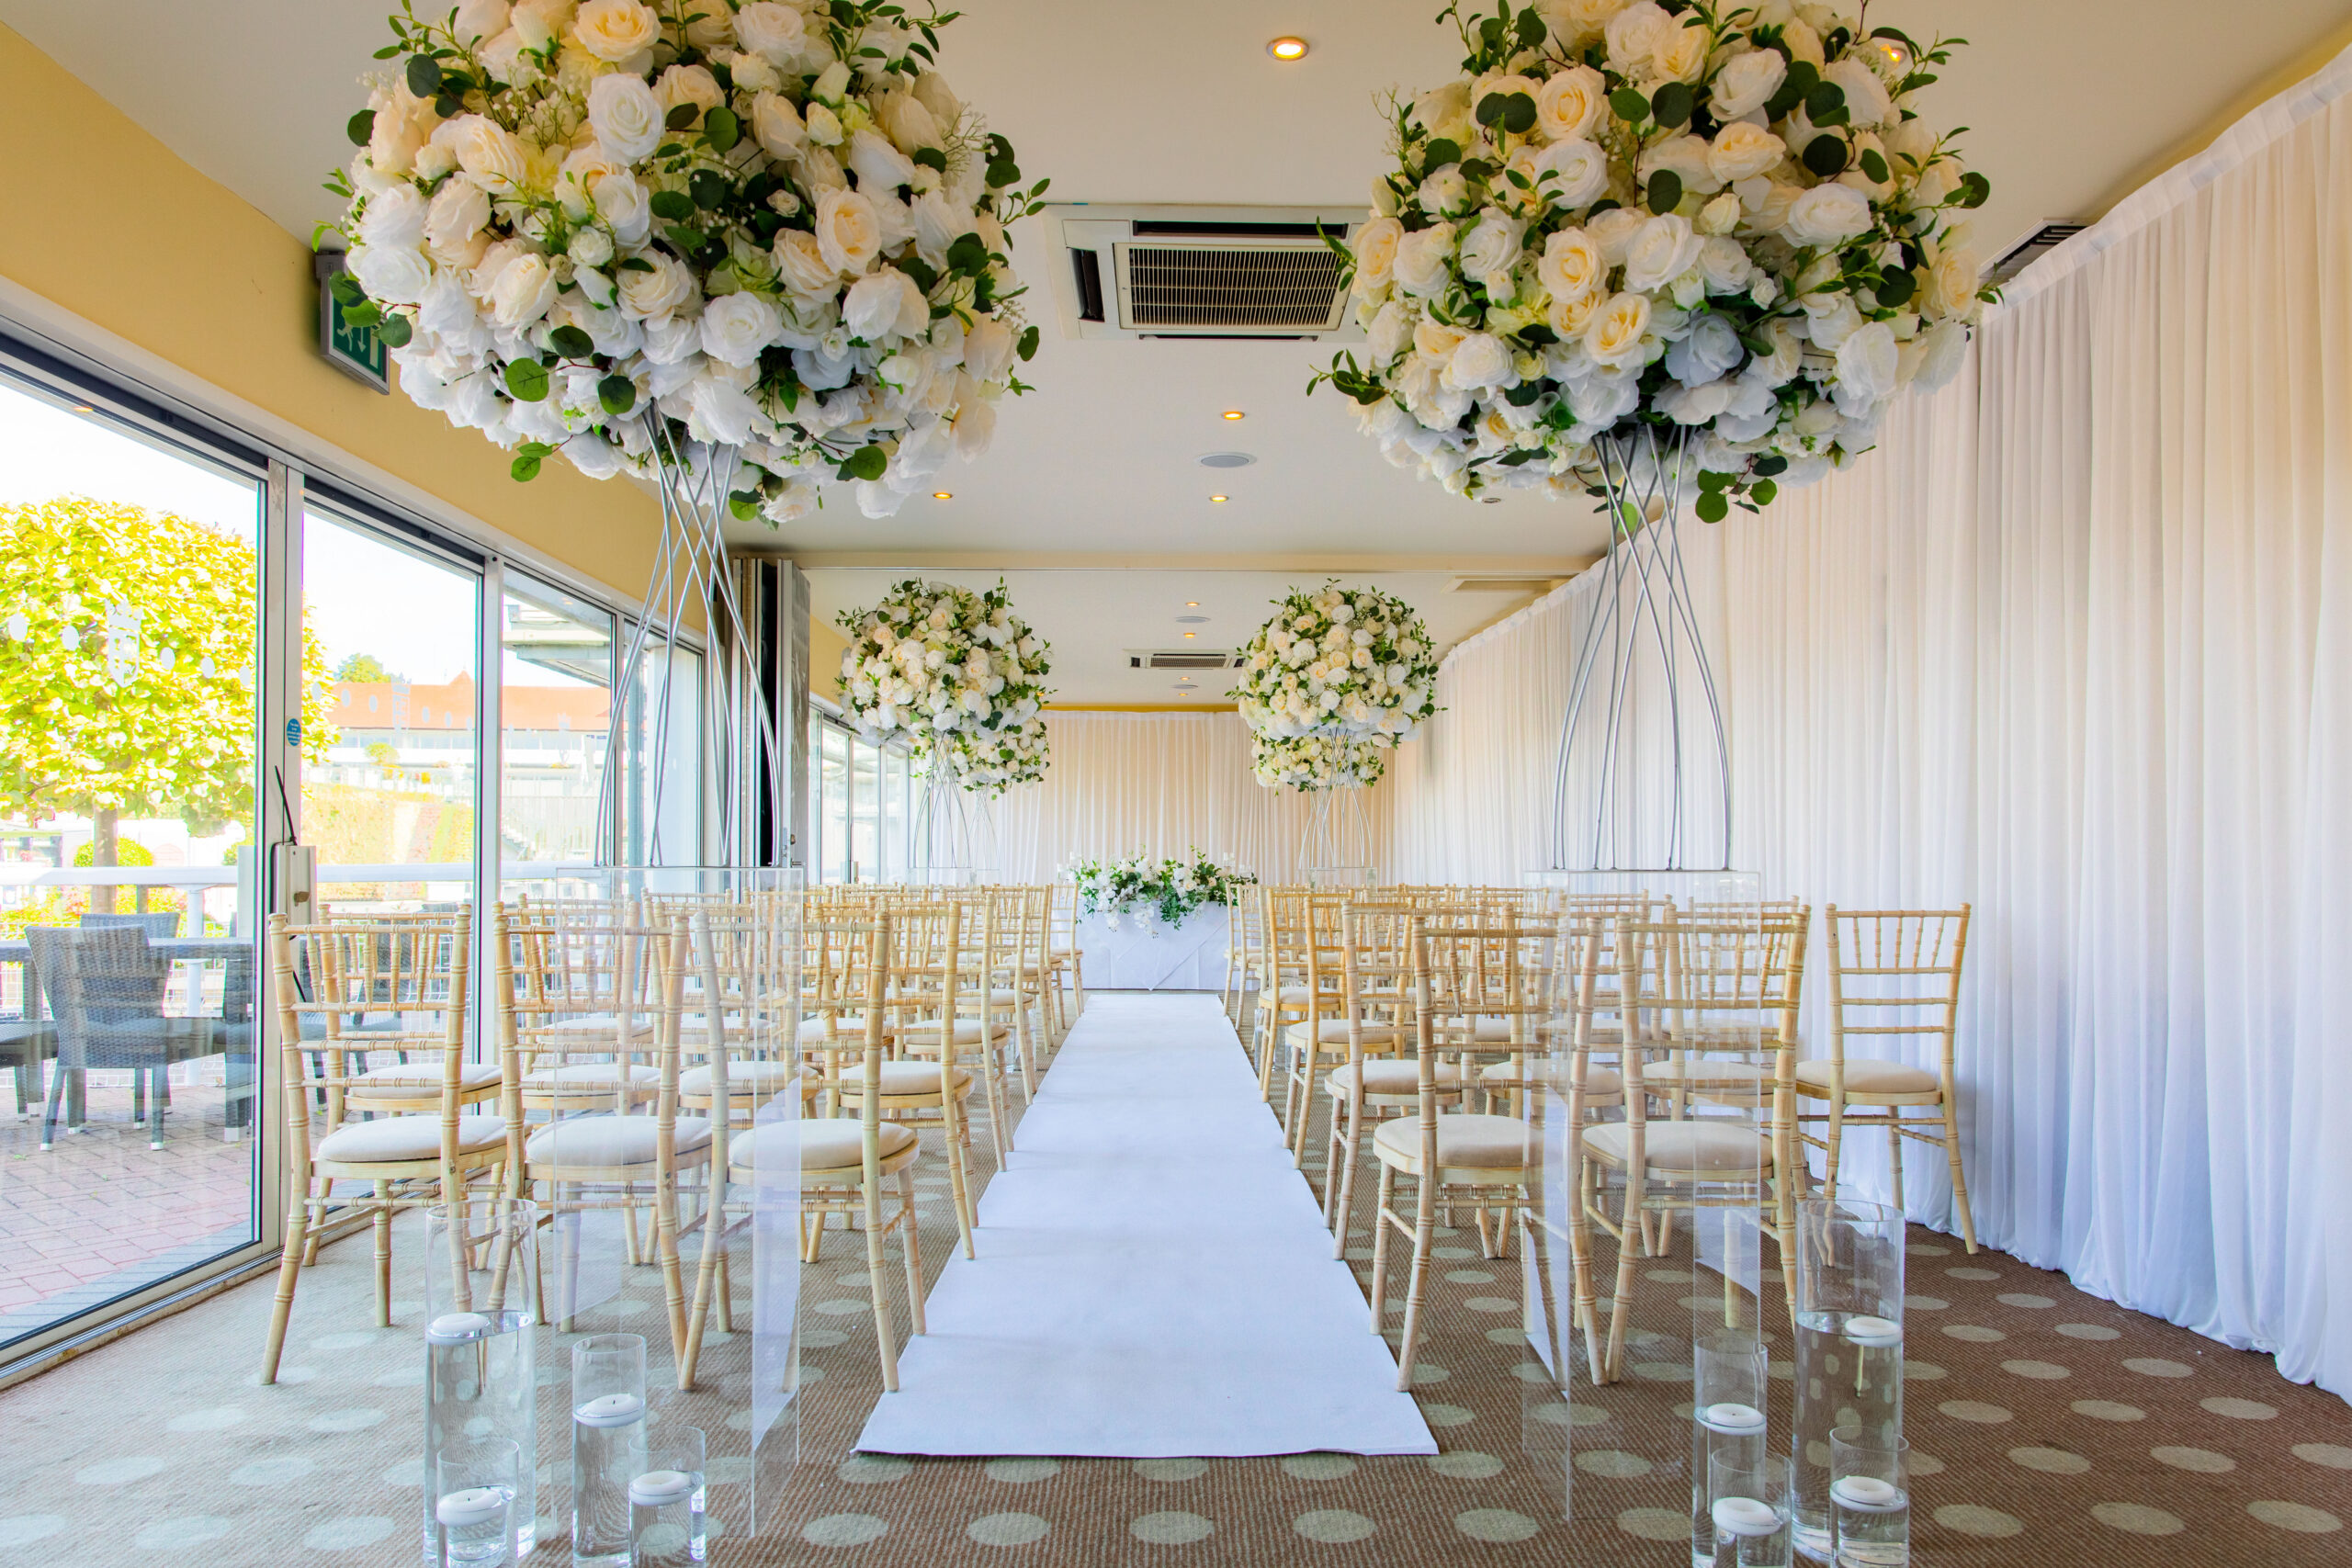 White and Yellow wedding decoration in the Paddock Rooms at Chester Racecourse. Wedding Ceremony aisle lined with white and yellow rose bushes. 